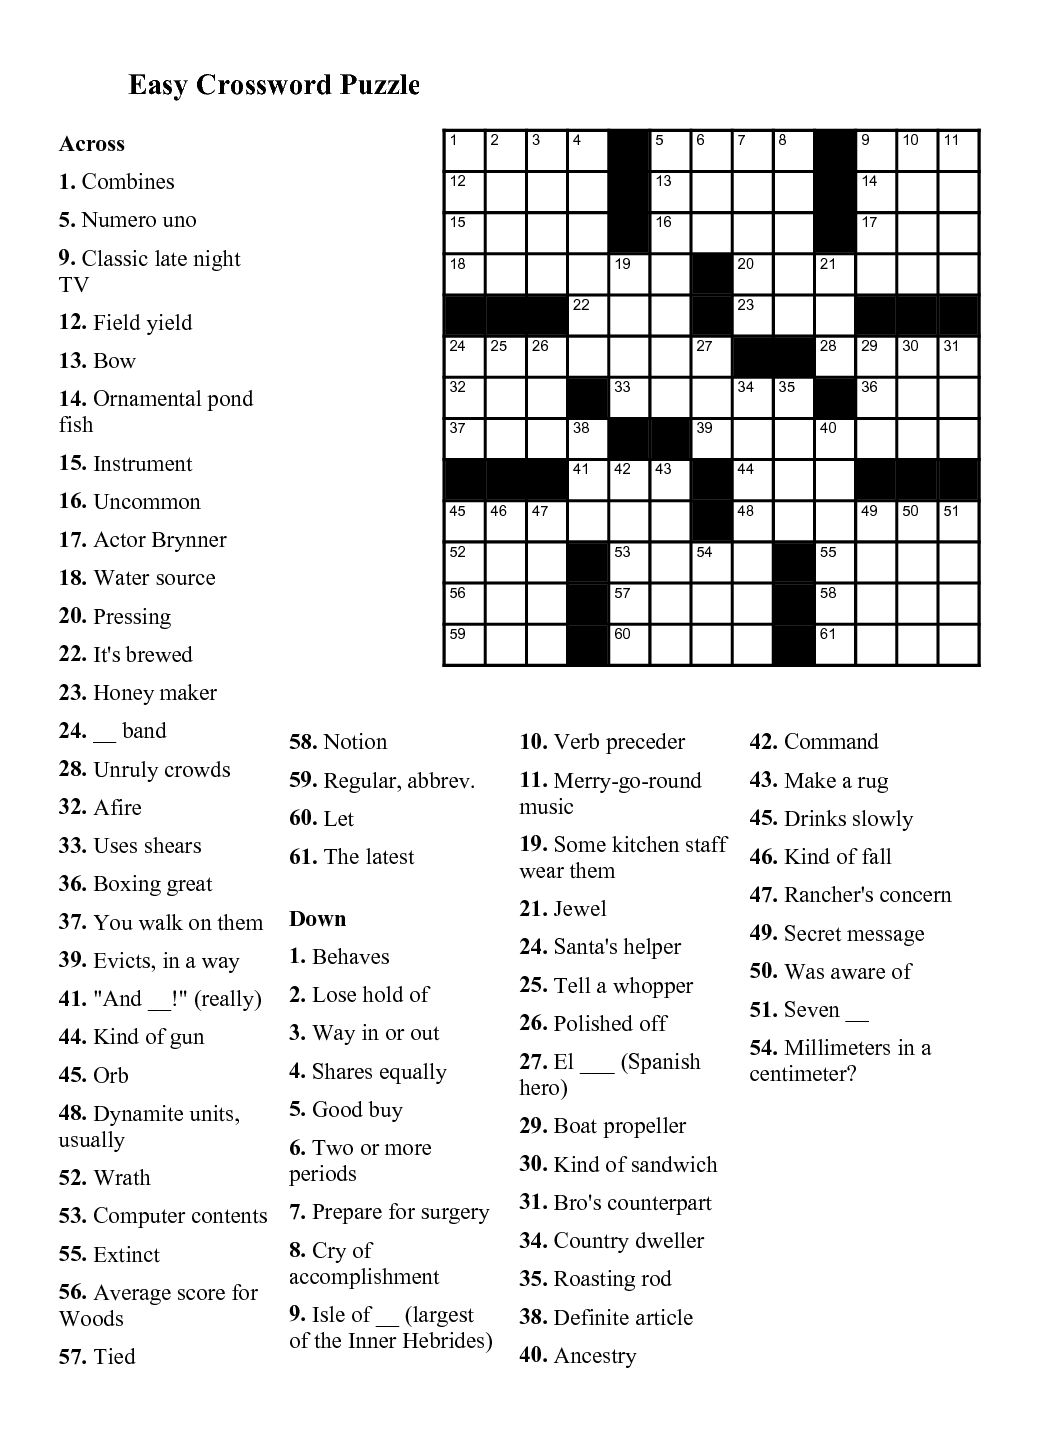 Easy Crossword Puzzles Printable Daily Template - How To Make A Crossword Puzzle Free Printable